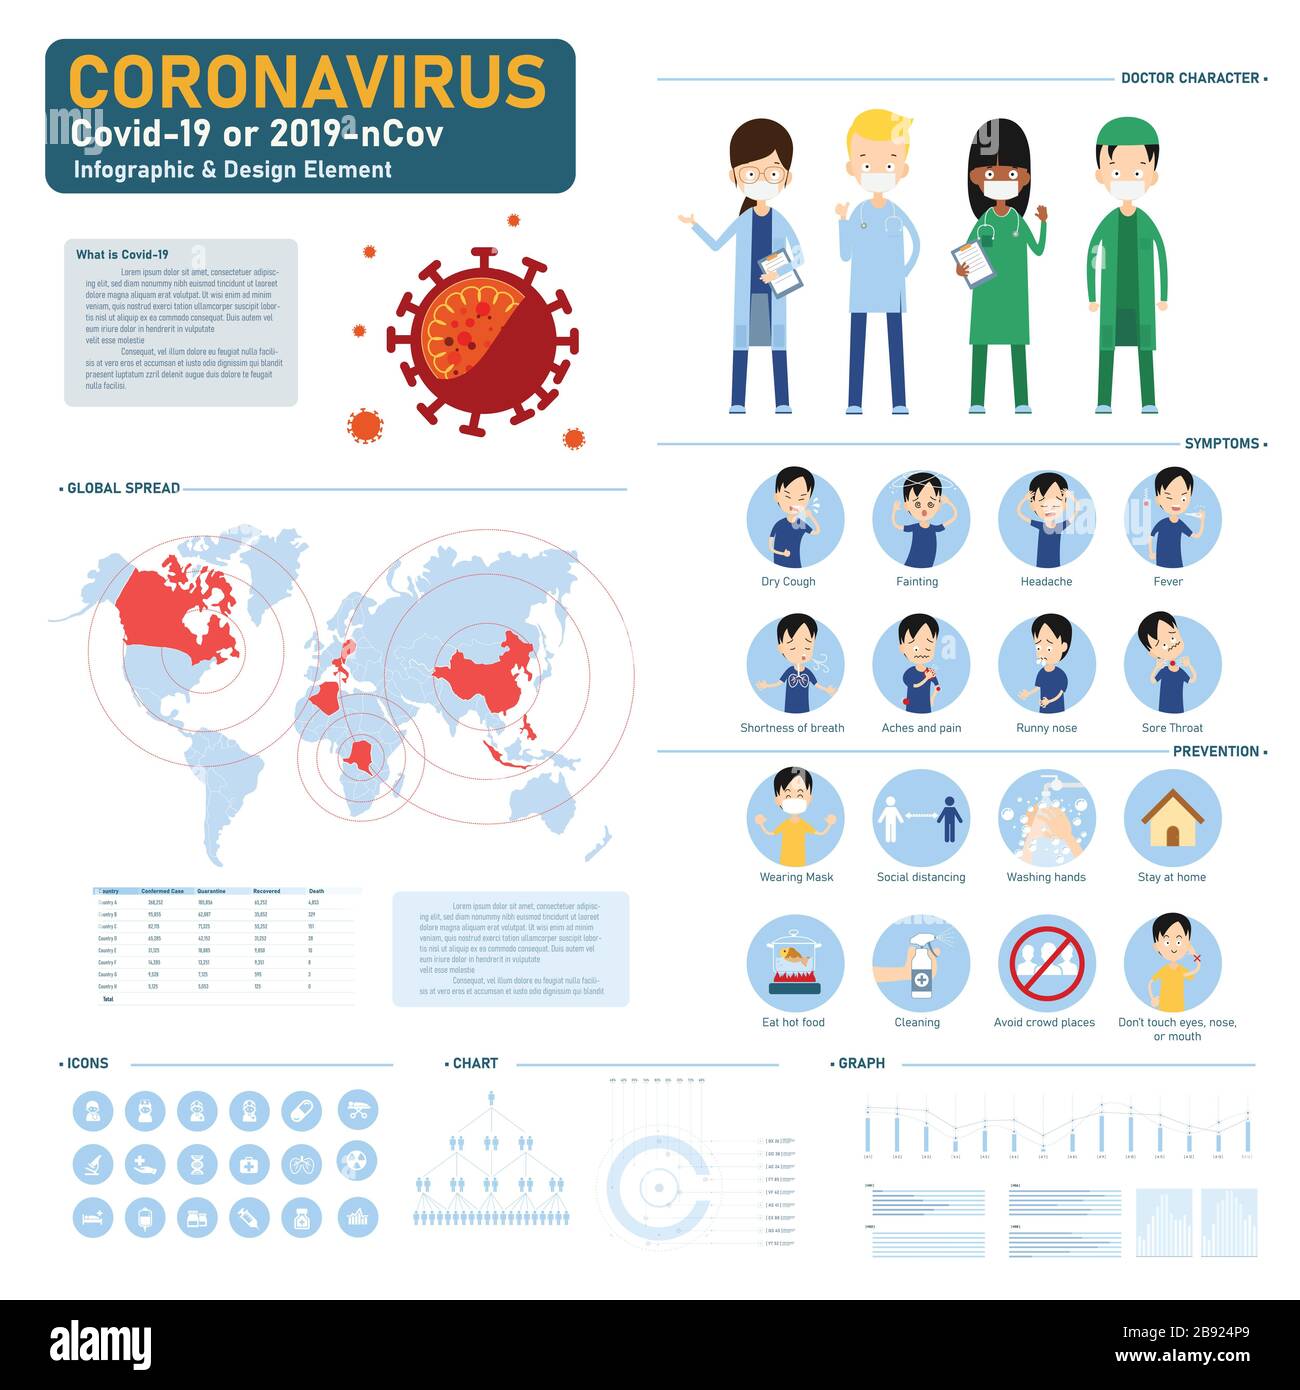 Coronavirus Covid-19 infographic and design element, with doctor character cartoon, symptoms and prevention tips, for avoiding the virus, with graph c Stock Vector